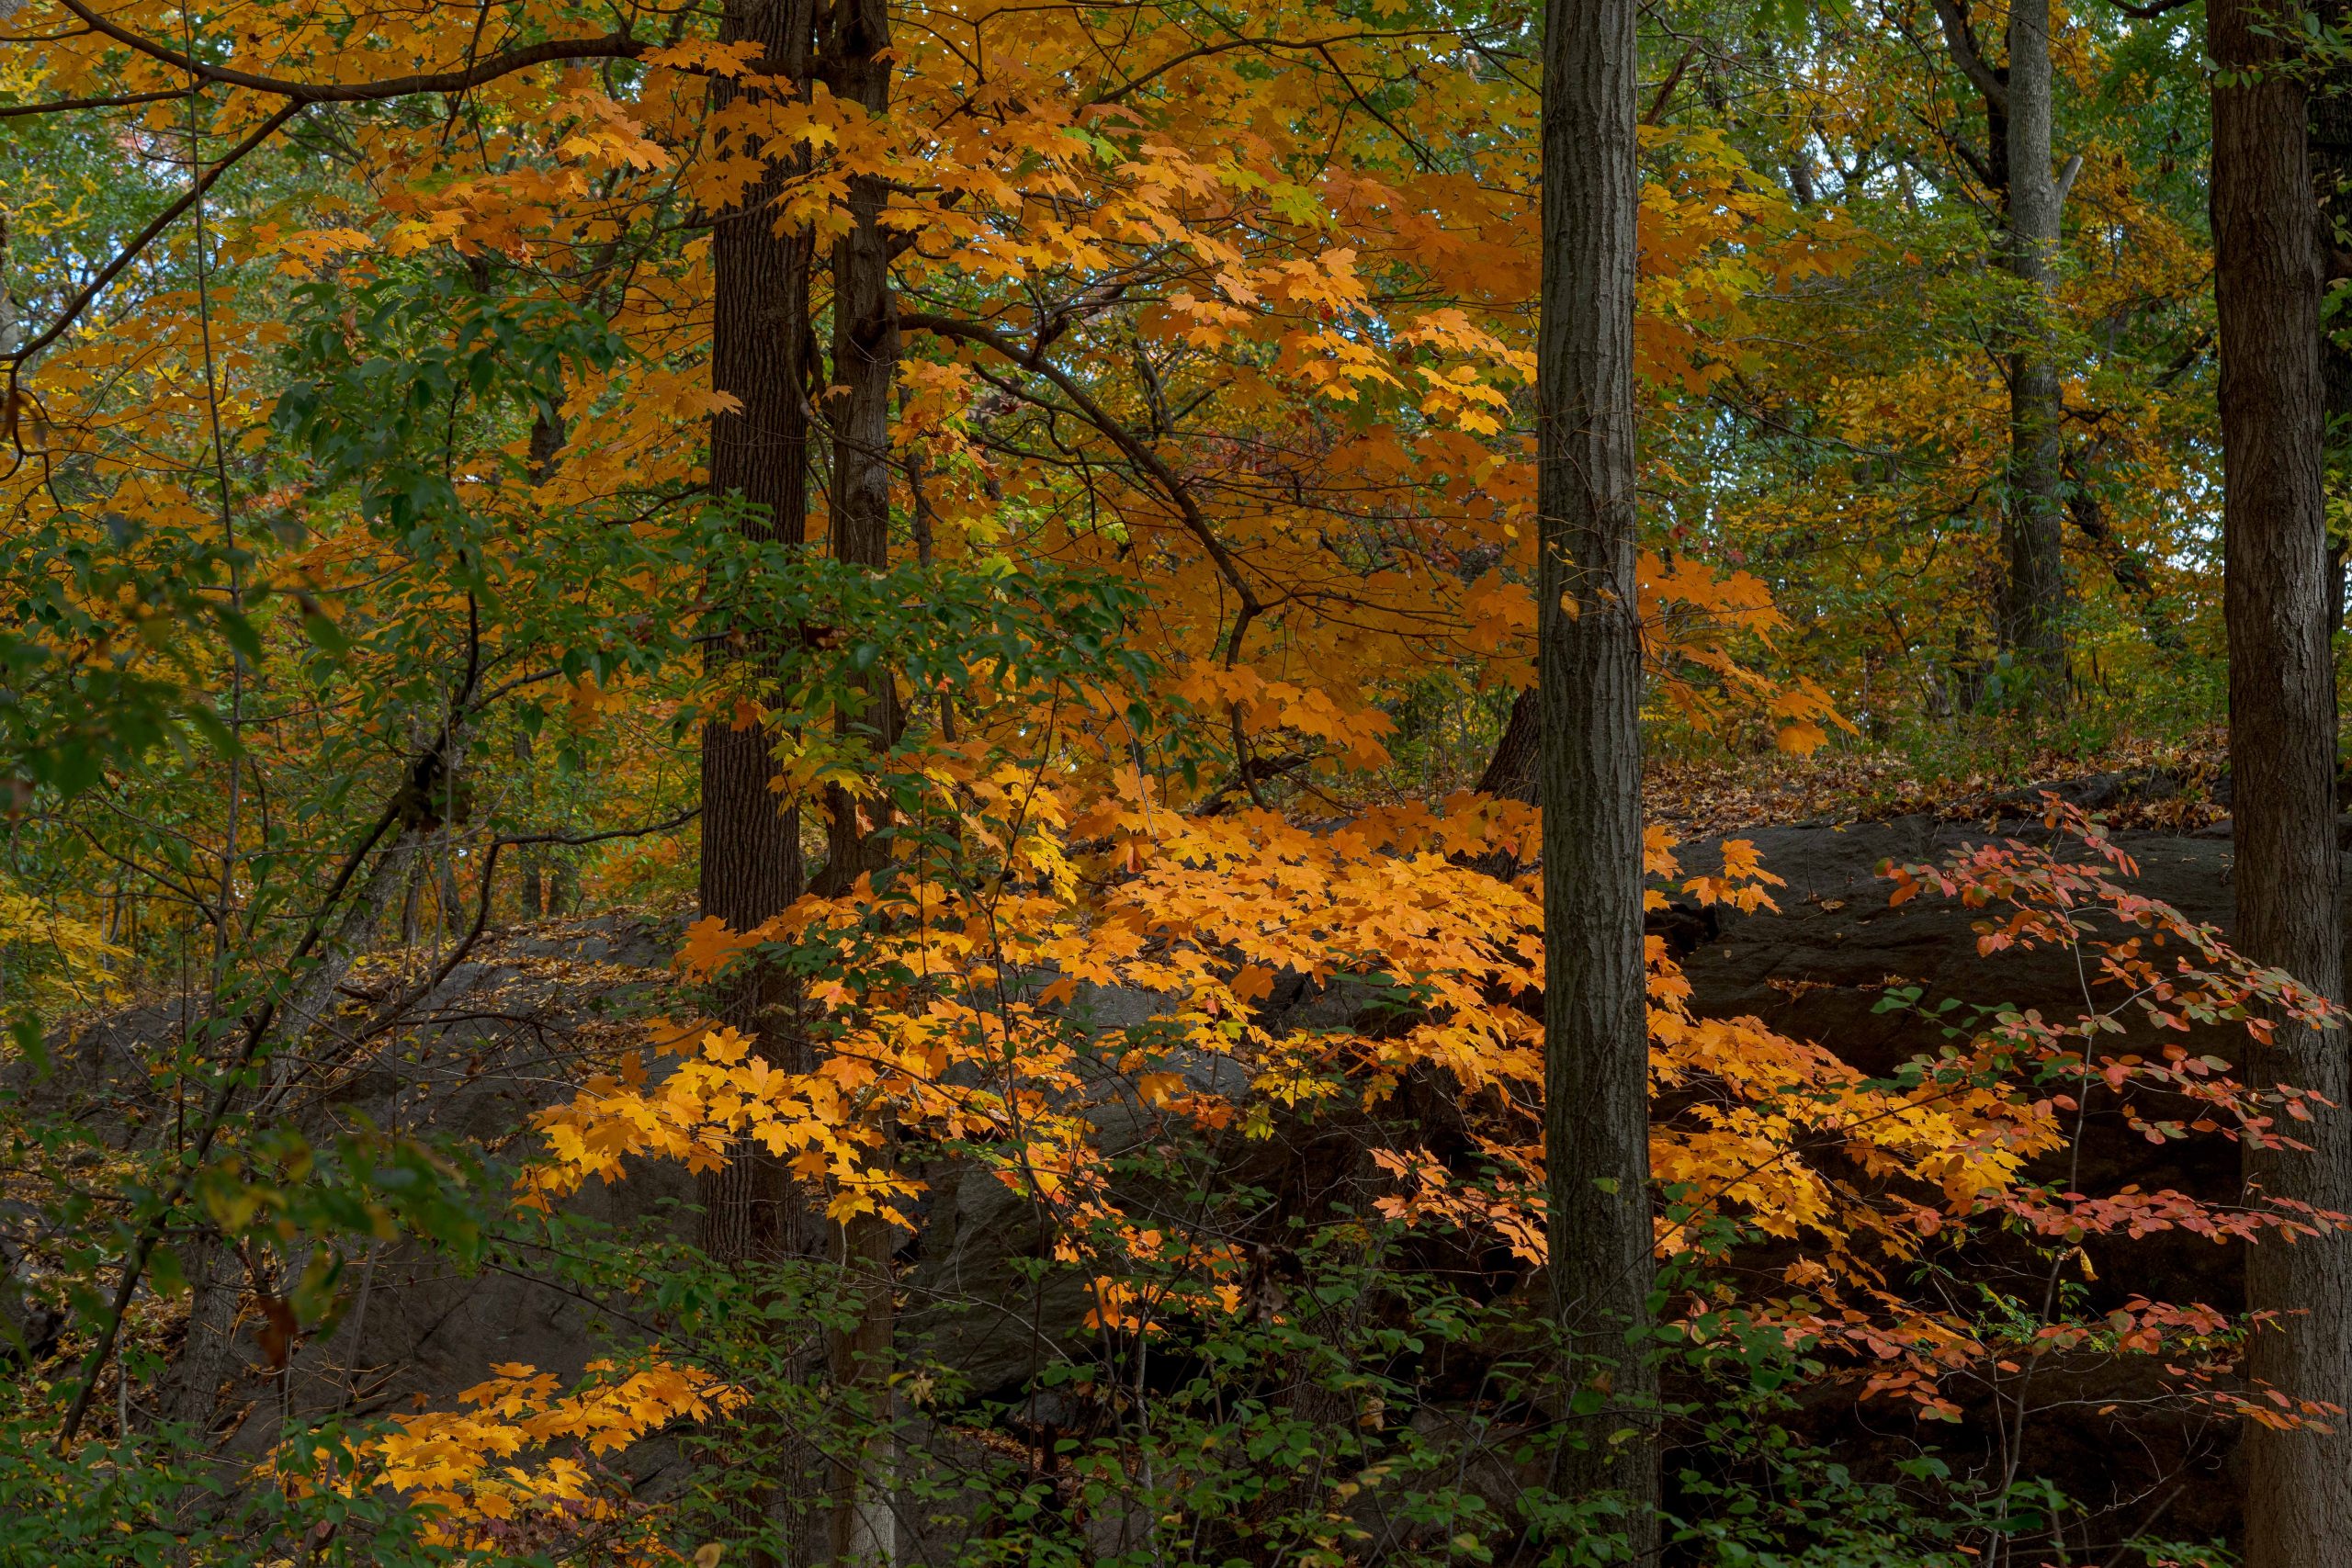 A dusk forest scene, with tall trees surrounded by lower, orange foliage